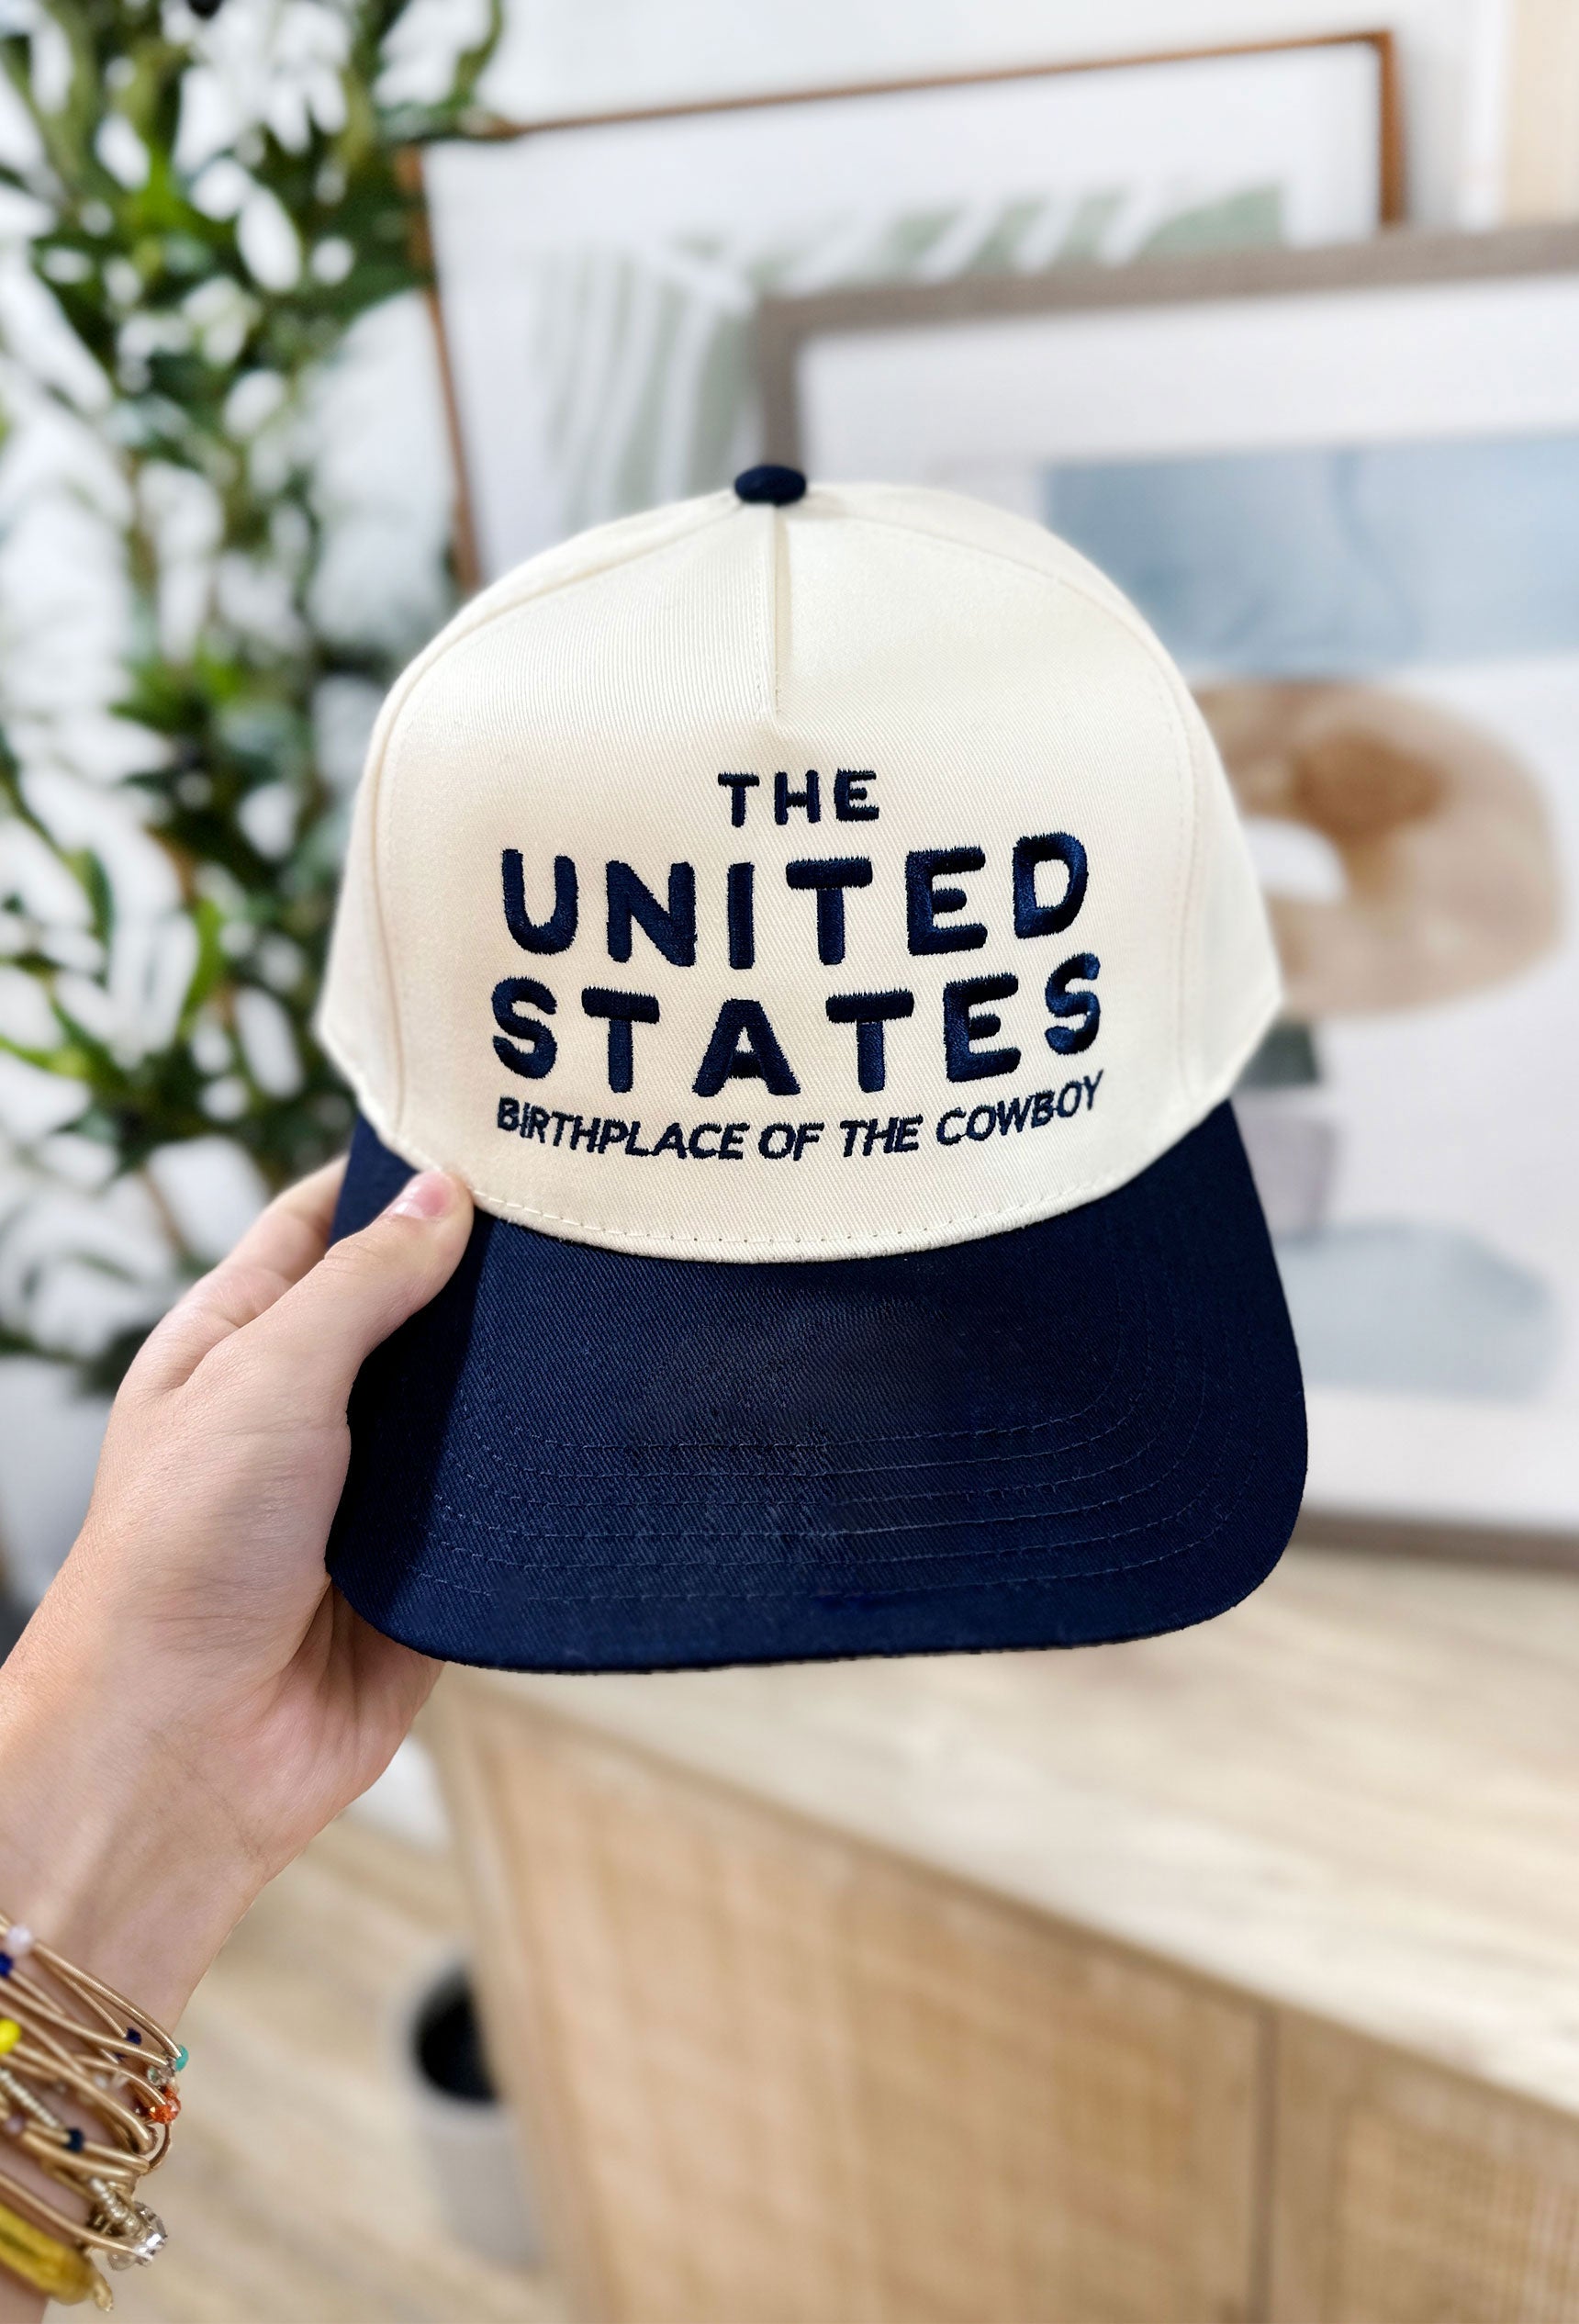 Friday + Saturday: Birthplace Of The Cowboy Trucker Hat, Ball Cap in off white and navy embroidered with "The United States birthplace of the cowboy"